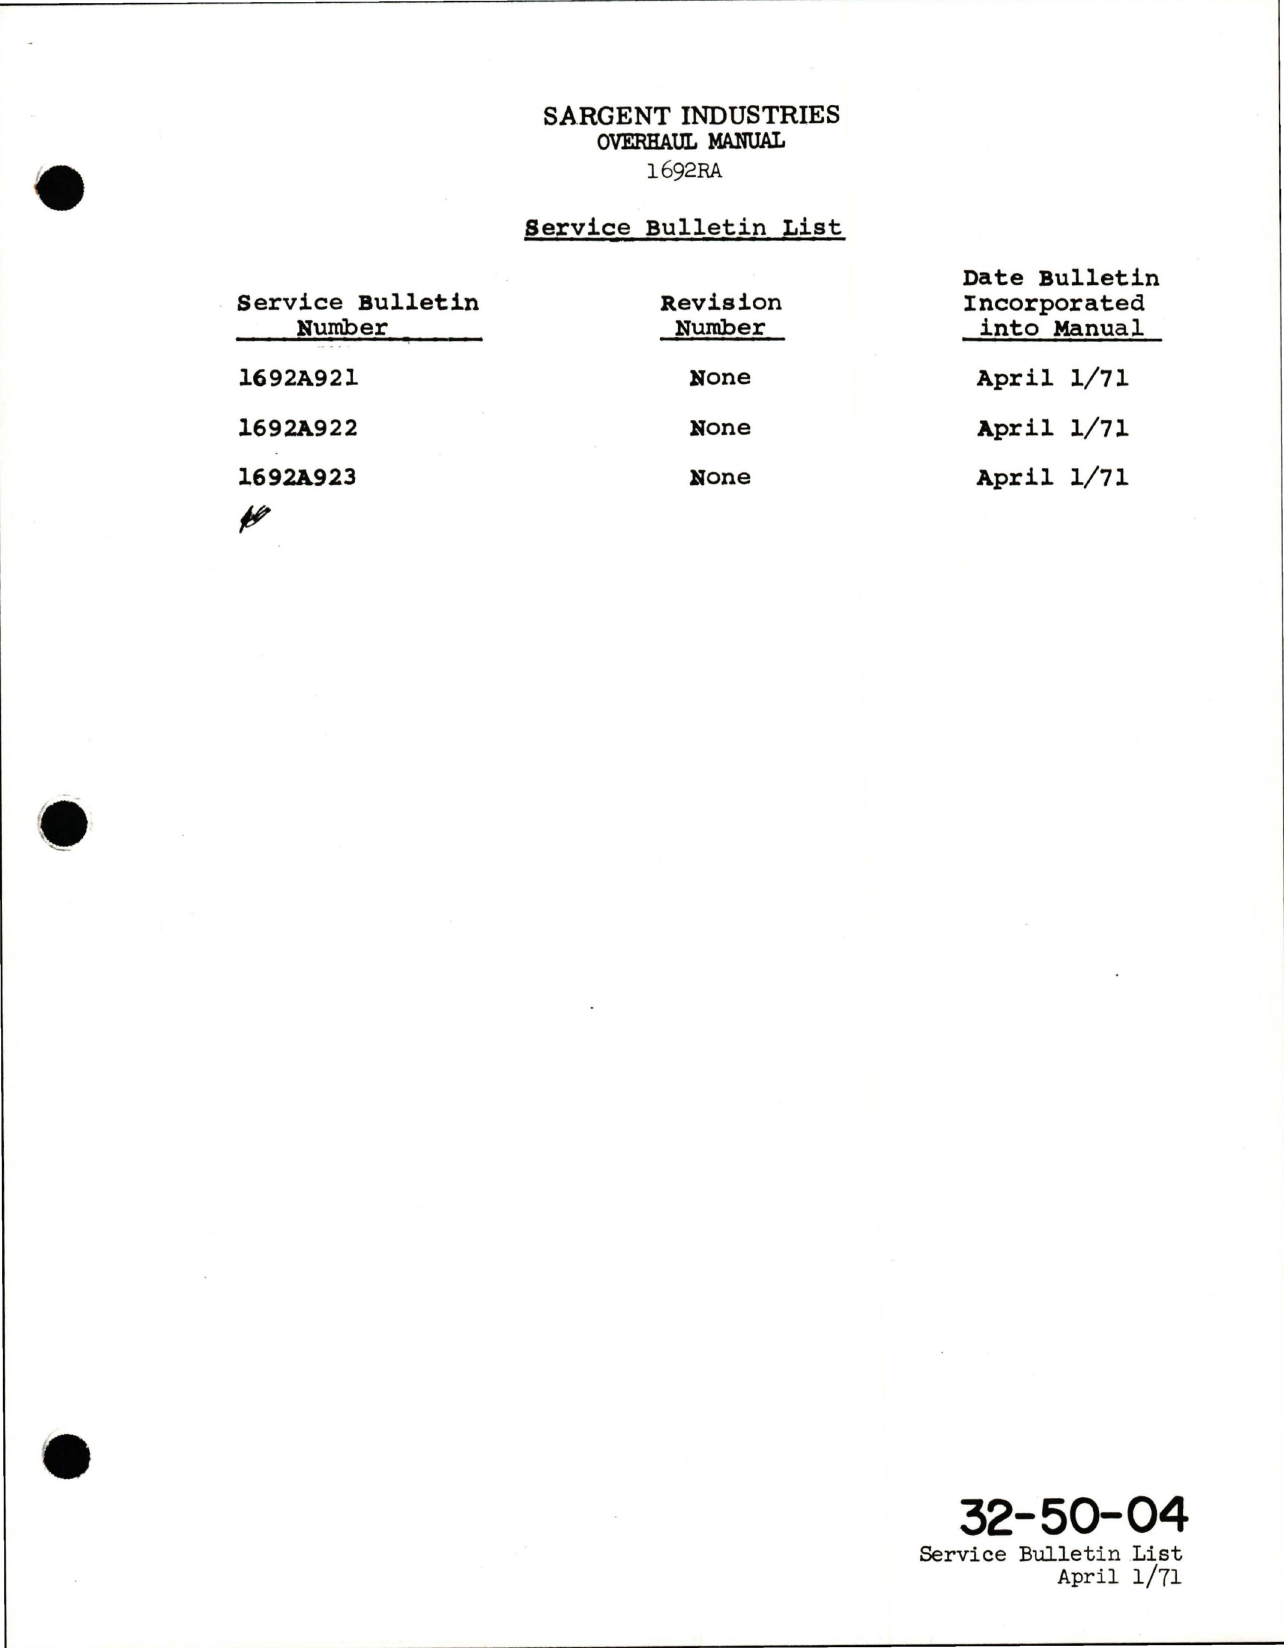 Sample page 9 from AirCorps Library document: Overhaul Manual with Illustrated Parts List for Nose Wheel Steering Metering Valve Assembl